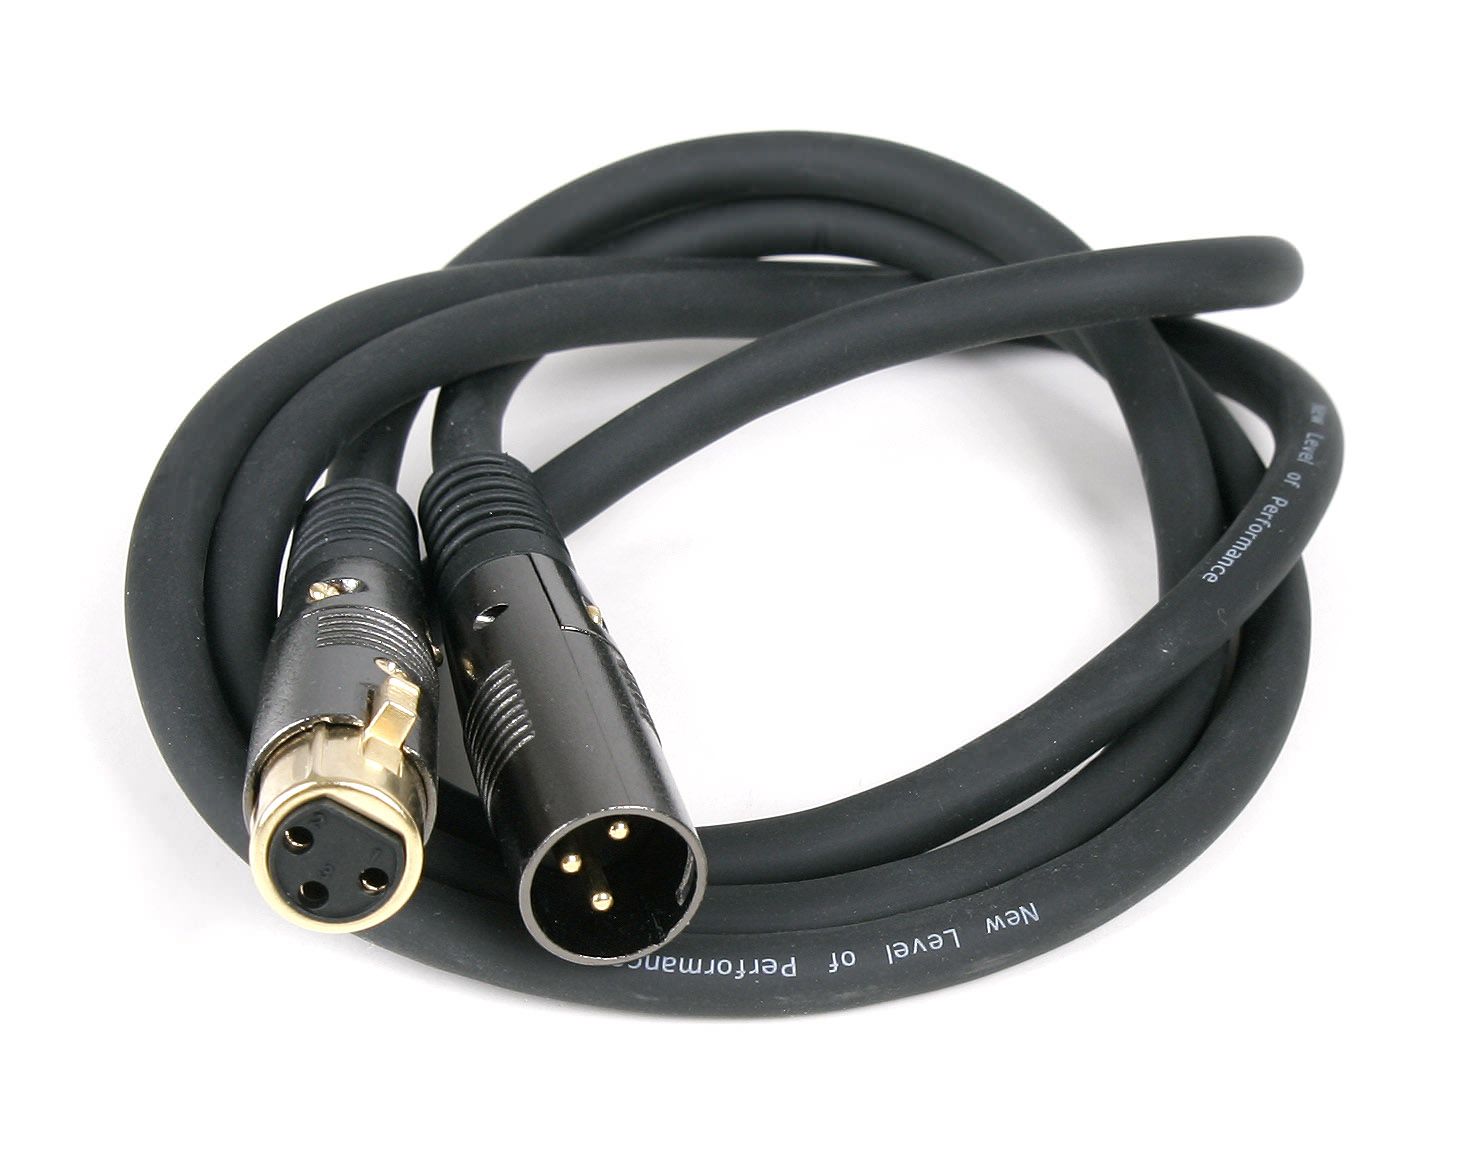 Microphone & XLR Cables